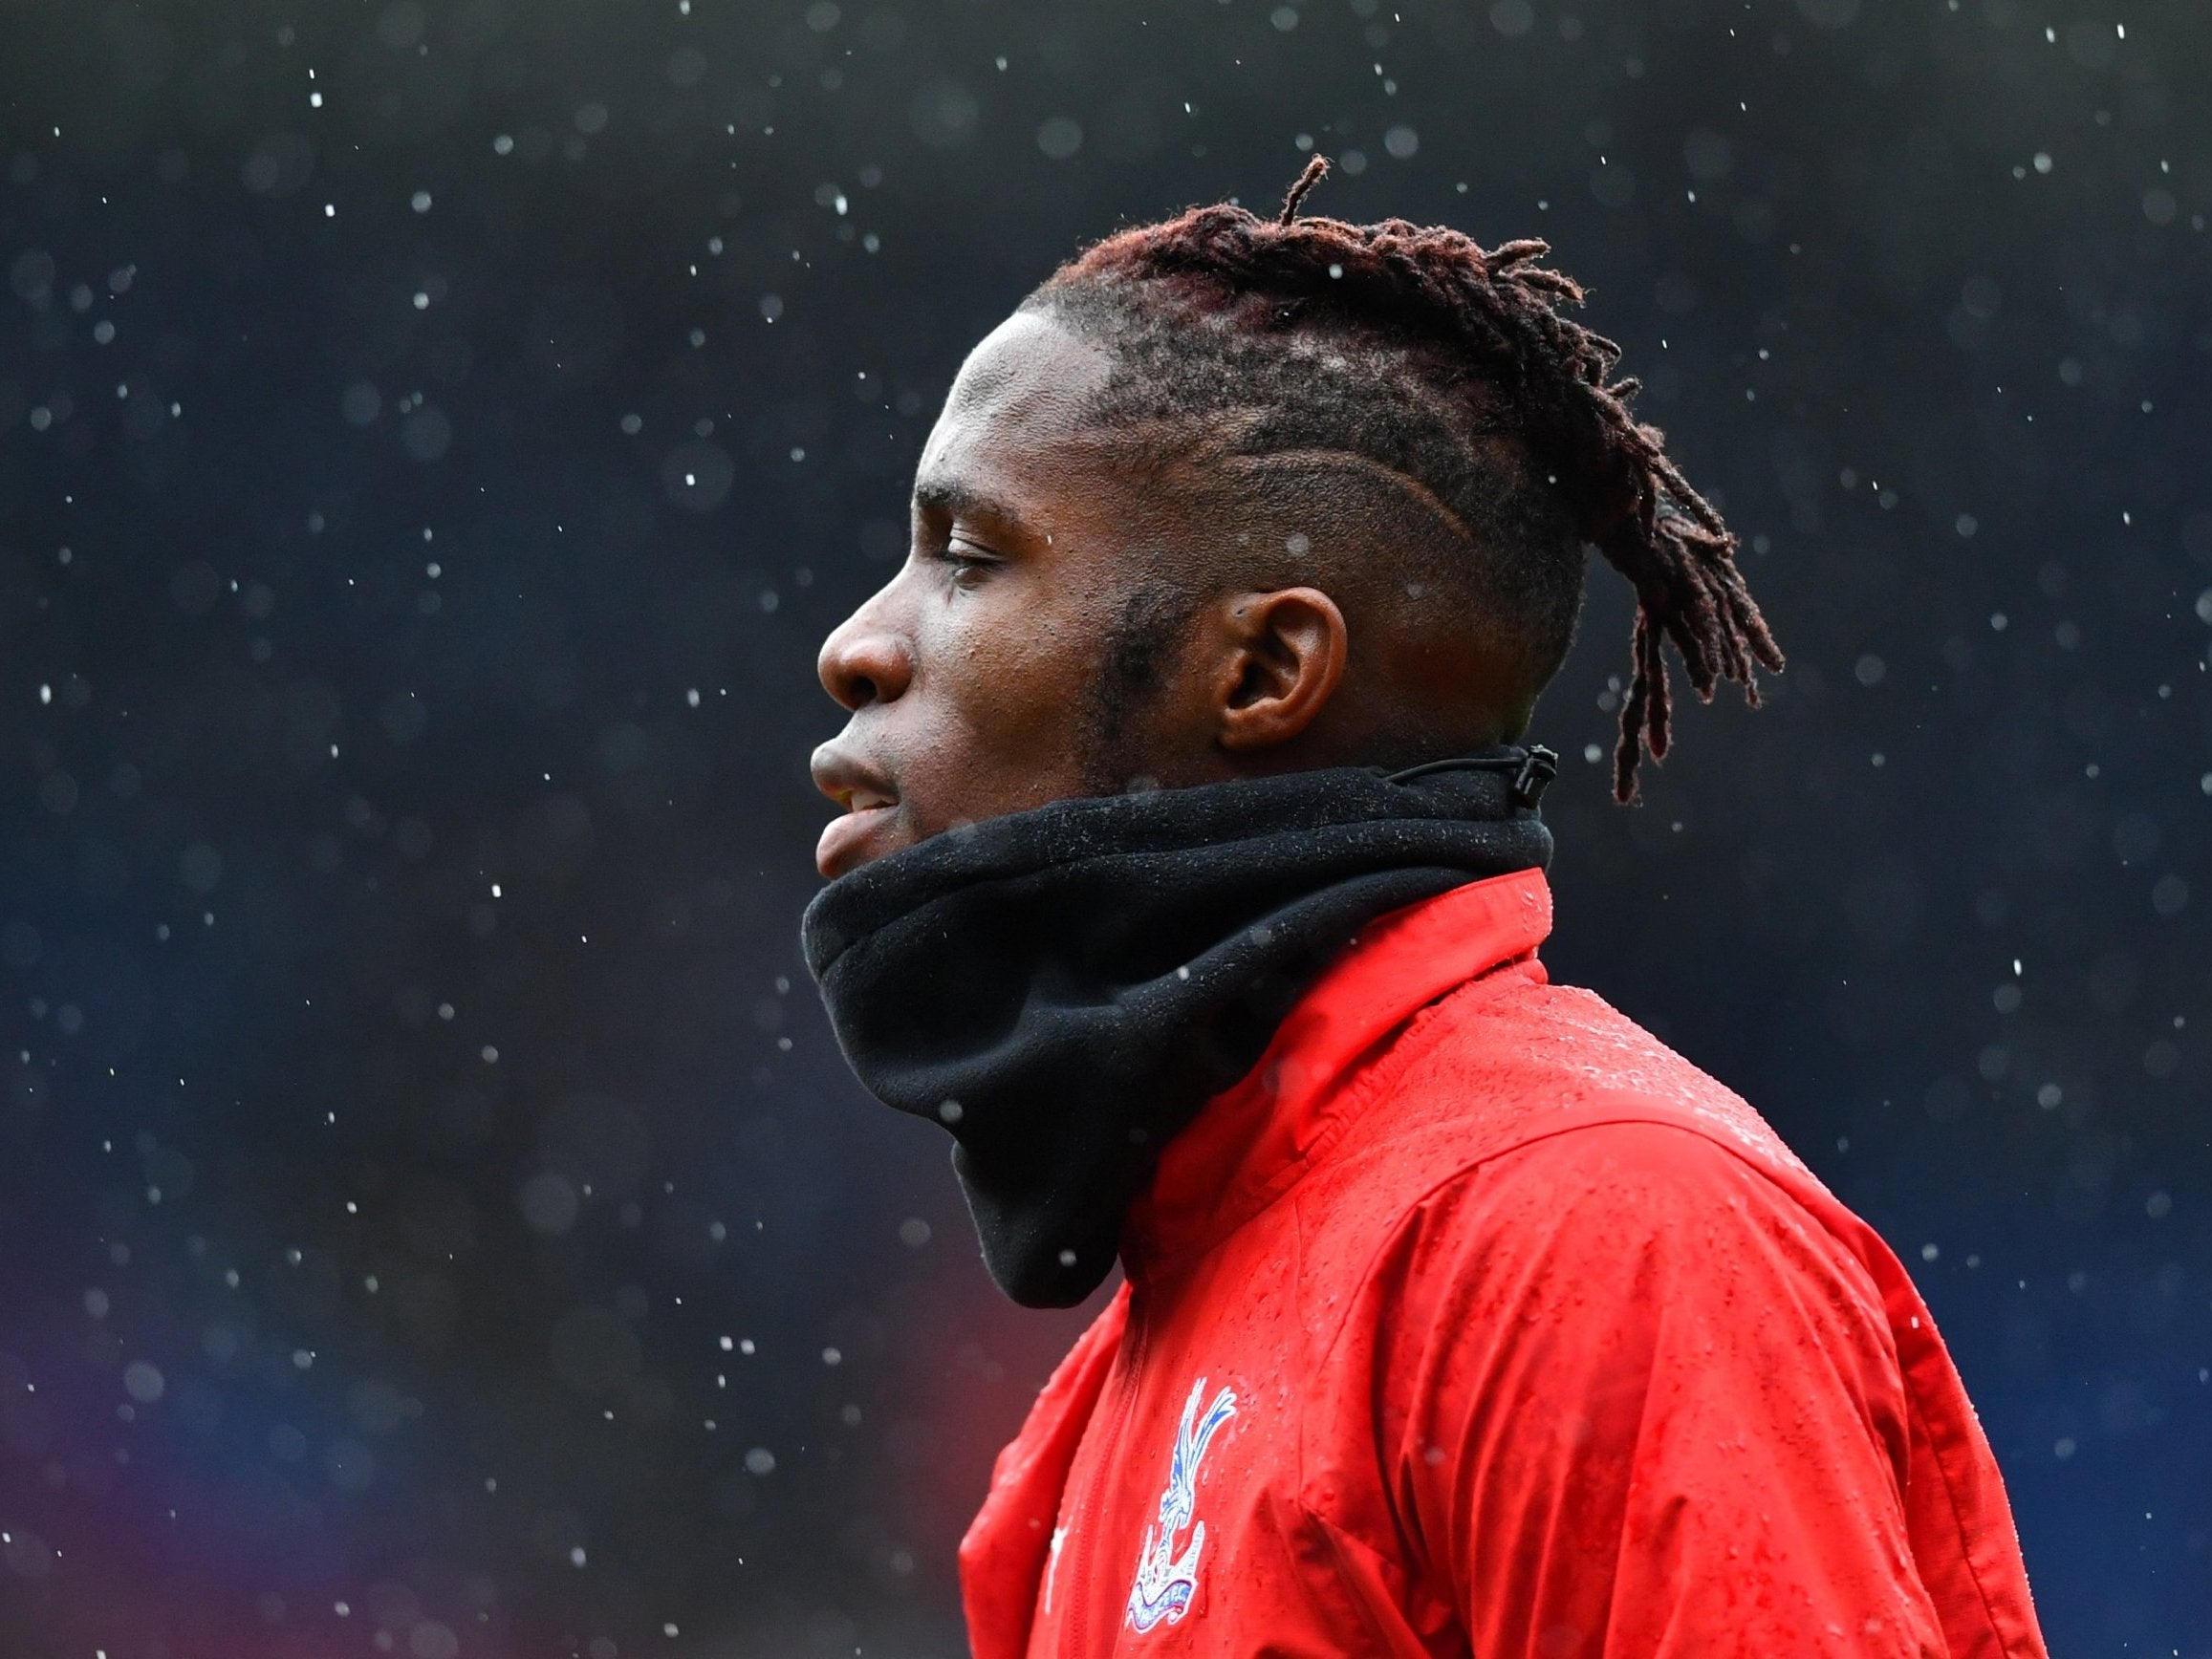 Crystal Palace boss Roy Hodgson backs Wilfried Zaha after forward receives death threats and racist abuse after Arsenal penalty